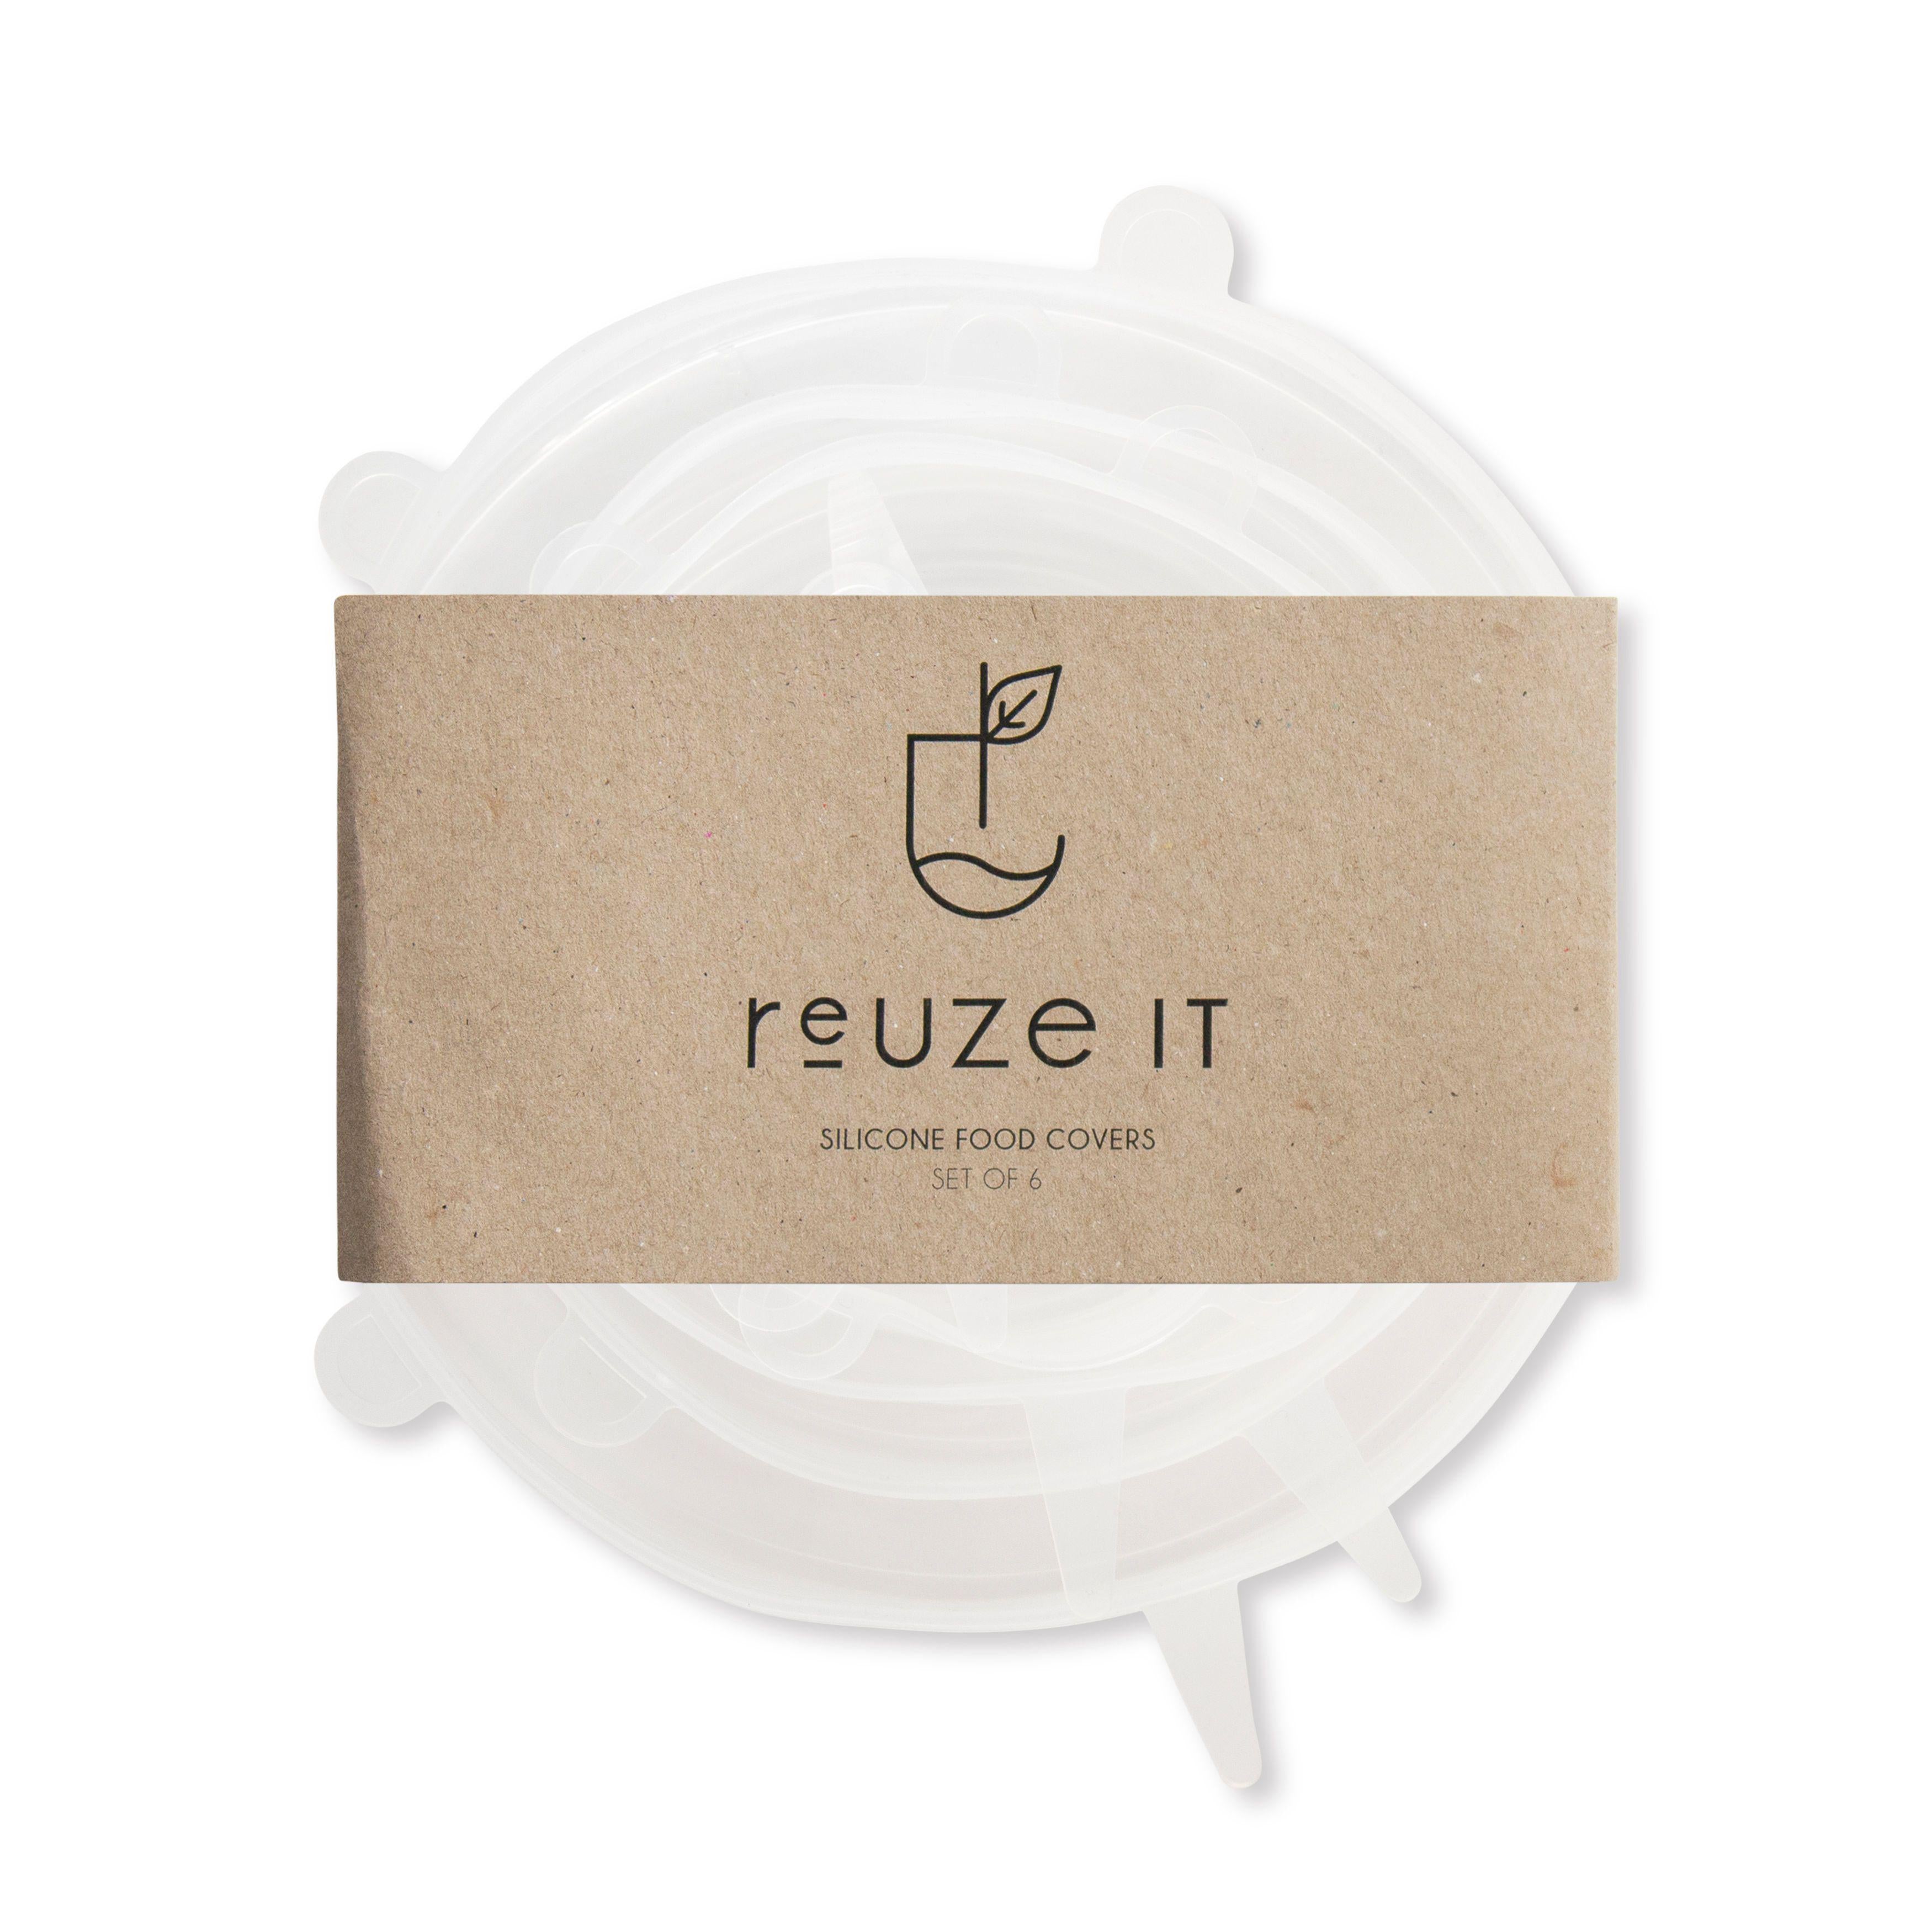 Silicone Food Covers | Storage | Reuze It | Eco Store | Eco Friendly Products